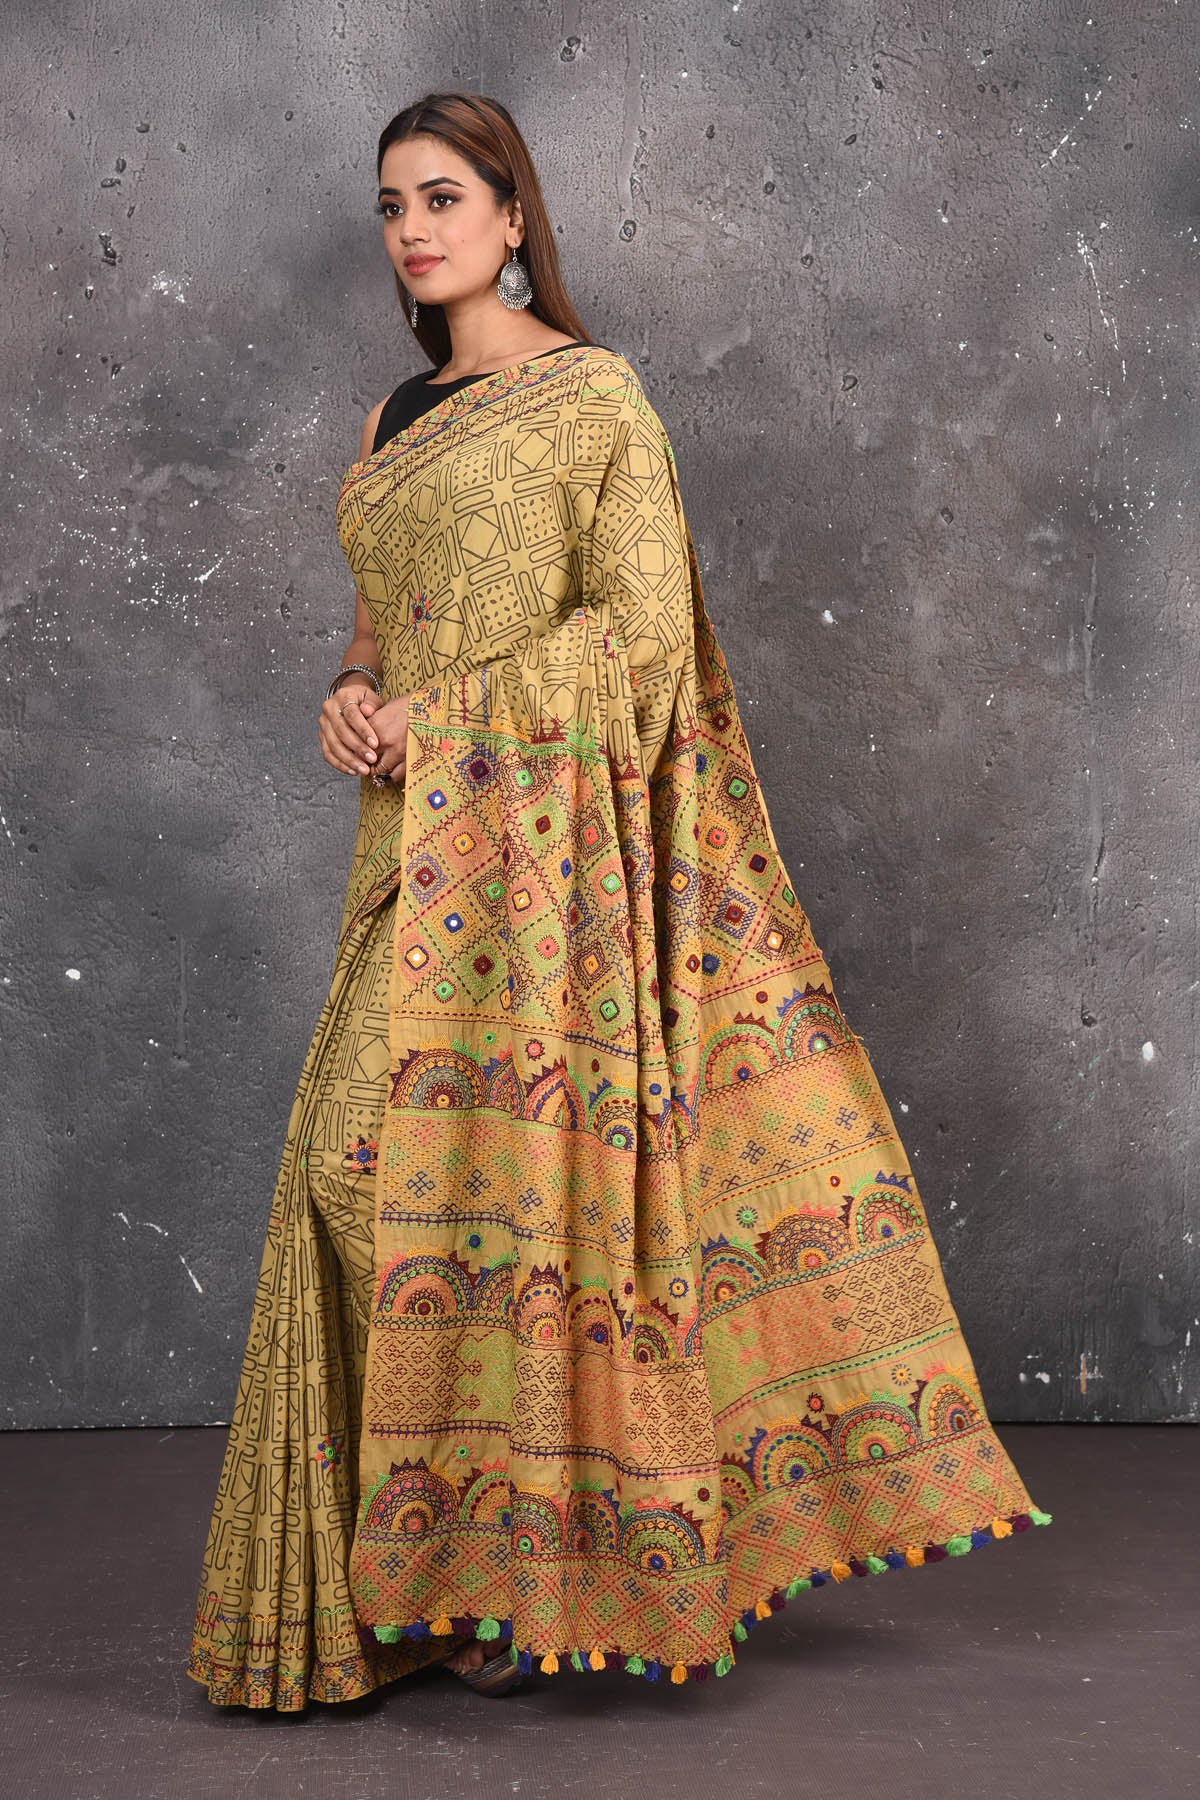 Shop this classy mustard yellow hand painted madhubani cotton saree online in USA. Perfect to be worn as part of your everyday work wear, with this hand-painted Mustard Yellow Madhubani saree, elegance meets traditional. Add this designer Lambani embroidery designer saree to your collection from Pure Elegance Indian Fashion Store in USA.- Side view.